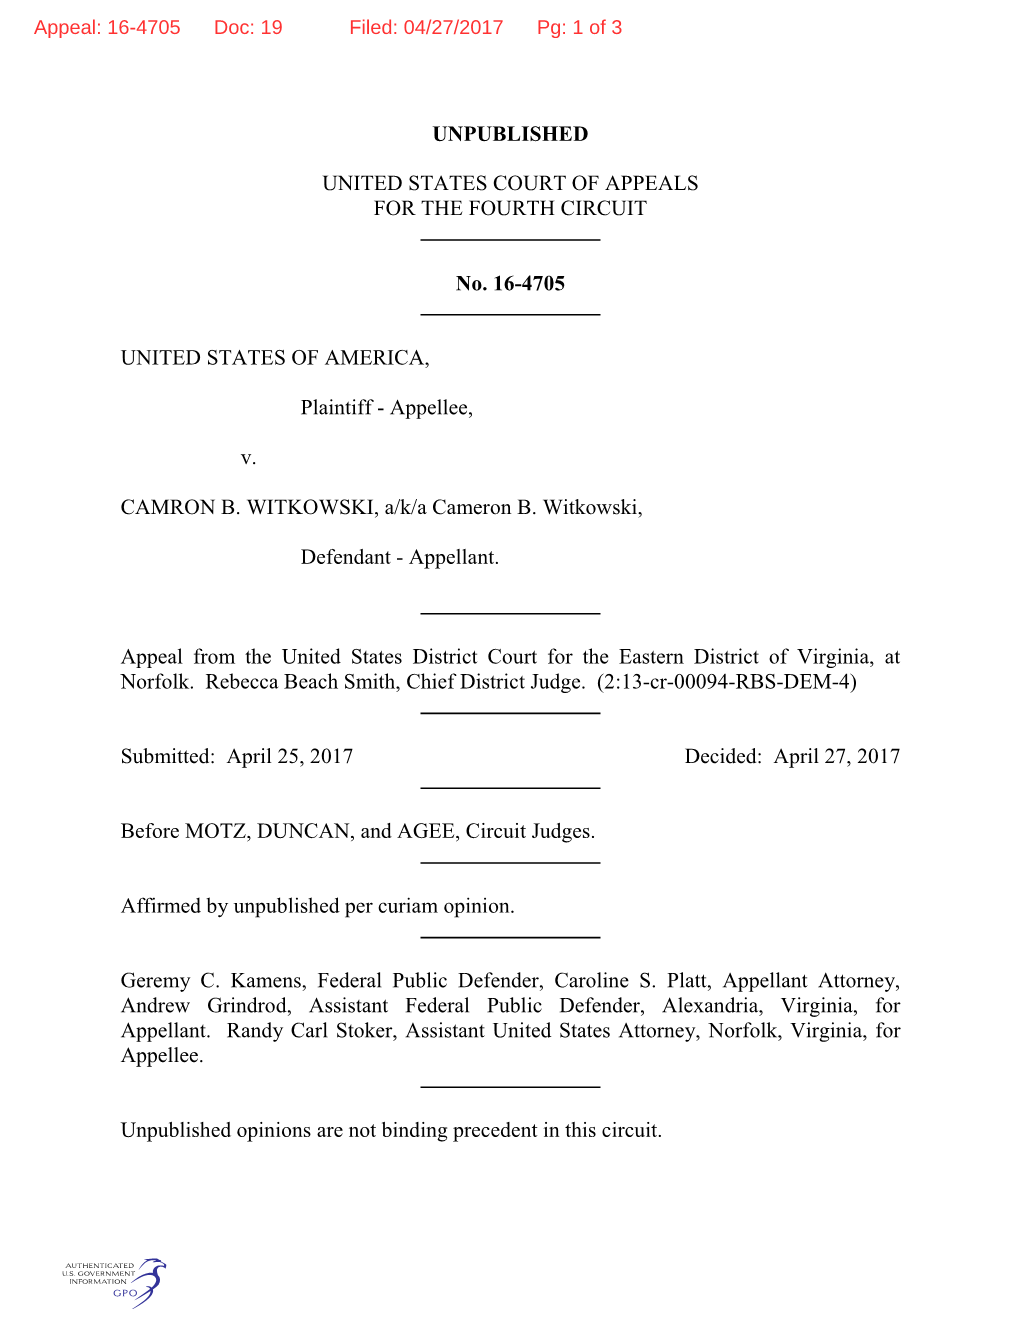 UNPUBLISHED UNITED STATES COURT of APPEALS for the FOURTH CIRCUIT No. 16-4705 UNITED STATES of AMERICA, Plaintiff